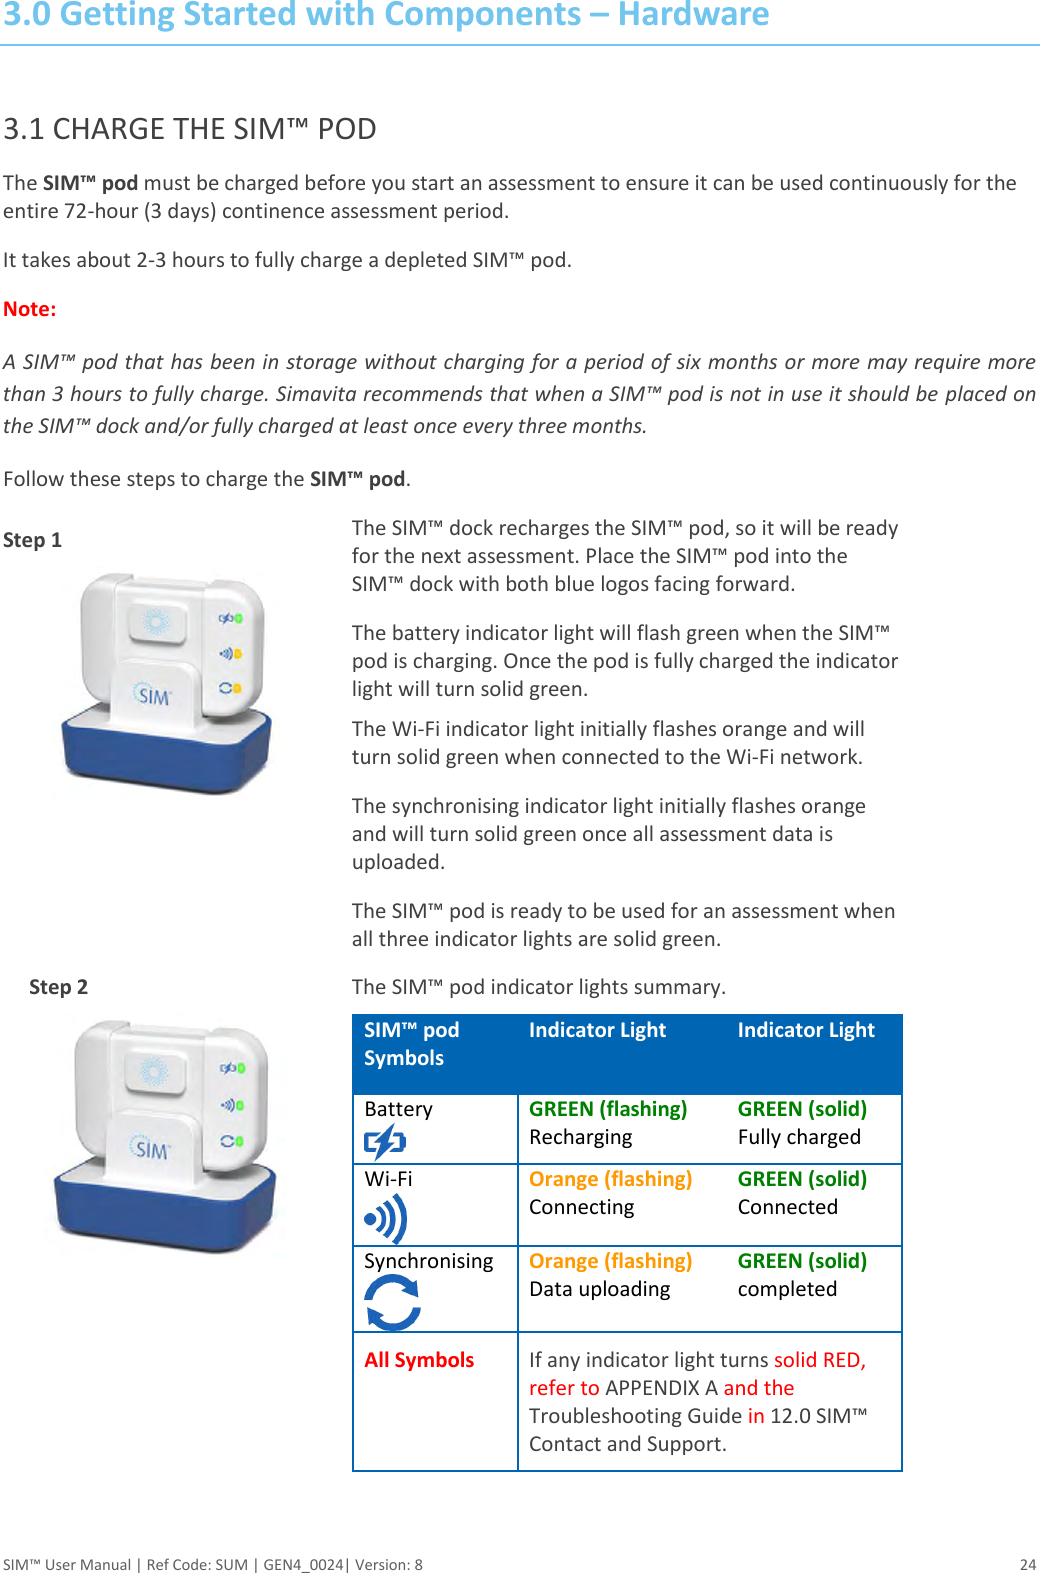  SIM™ User Manual | Ref Code: SUM | GEN4_0024| Version: 8  24 3.0 Getting Started with Components – Hardware   3.1 CHARGE THE SIM™ POD The SIM™ pod must be charged before you start an assessment to ensure it can be used continuously for the entire 72-hour (3 days) continence assessment period.  It takes about 2-3 hours to fully charge a depleted SIM™ pod. Note: A SIM™ pod that has been in storage without charging for a period of six months or more may require more than 3 hours to fully charge. Simavita recommends that when a SIM™ pod is not in use it should be placed on the SIM™ dock and/or fully charged at least once every three months. Follow these steps to charge the SIM™ pod. Step 1           Step 2              The SIM™ dock recharges the SIM™ pod, so it will be ready for the next assessment. Place the SIM™ pod into the SIM™ dock with both blue logos facing forward. The battery indicator light will flash green when the SIM™ pod is charging. Once the pod is fully charged the indicator light will turn solid green. The Wi-Fi indicator light initially flashes orange and will turn solid green when connected to the Wi-Fi network. The synchronising indicator light initially flashes orange and will turn solid green once all assessment data is uploaded. The SIM™ pod is ready to be used for an assessment when all three indicator lights are solid green.  The SIM™ pod indicator lights summary.  SIM™ pod  Symbols Indicator Light Indicator Light Battery  GREEN (flashing) Recharging GREEN (solid) Fully charged Wi-Fi   Orange (flashing) Connecting GREEN (solid) Connected Synchronising  Orange (flashing) Data uploading GREEN (solid) completed All Symbols If any indicator light turns solid RED, refer to APPENDIX A and the Troubleshooting Guide in 12.0 SIM™ Contact and Support.   